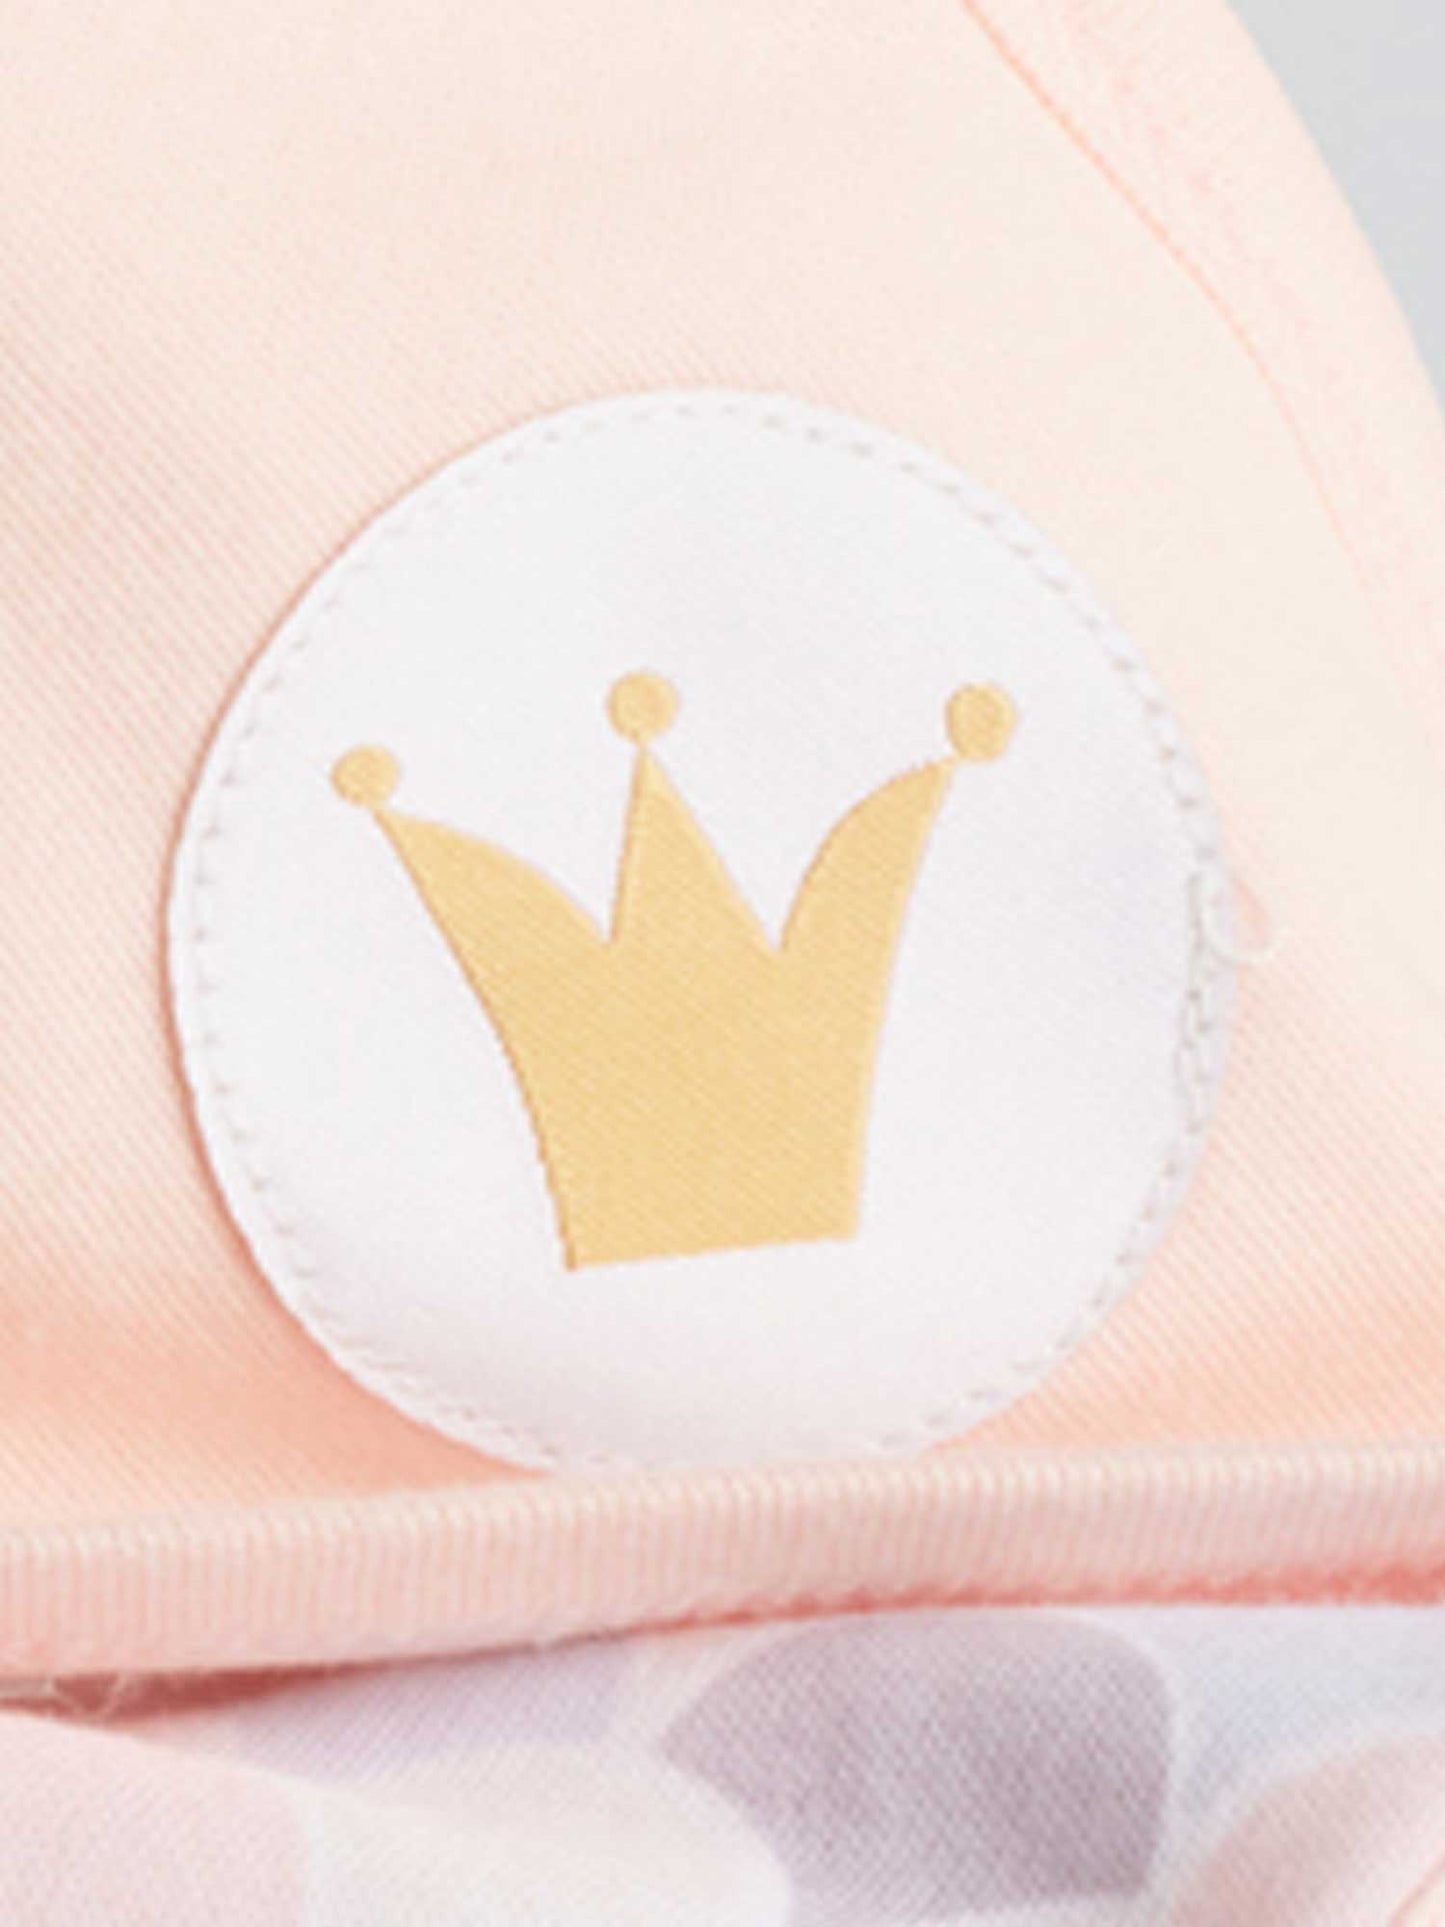 Th Gold Fish Logo on Baby Blanket Gold Fish 322 will make the little one feel special